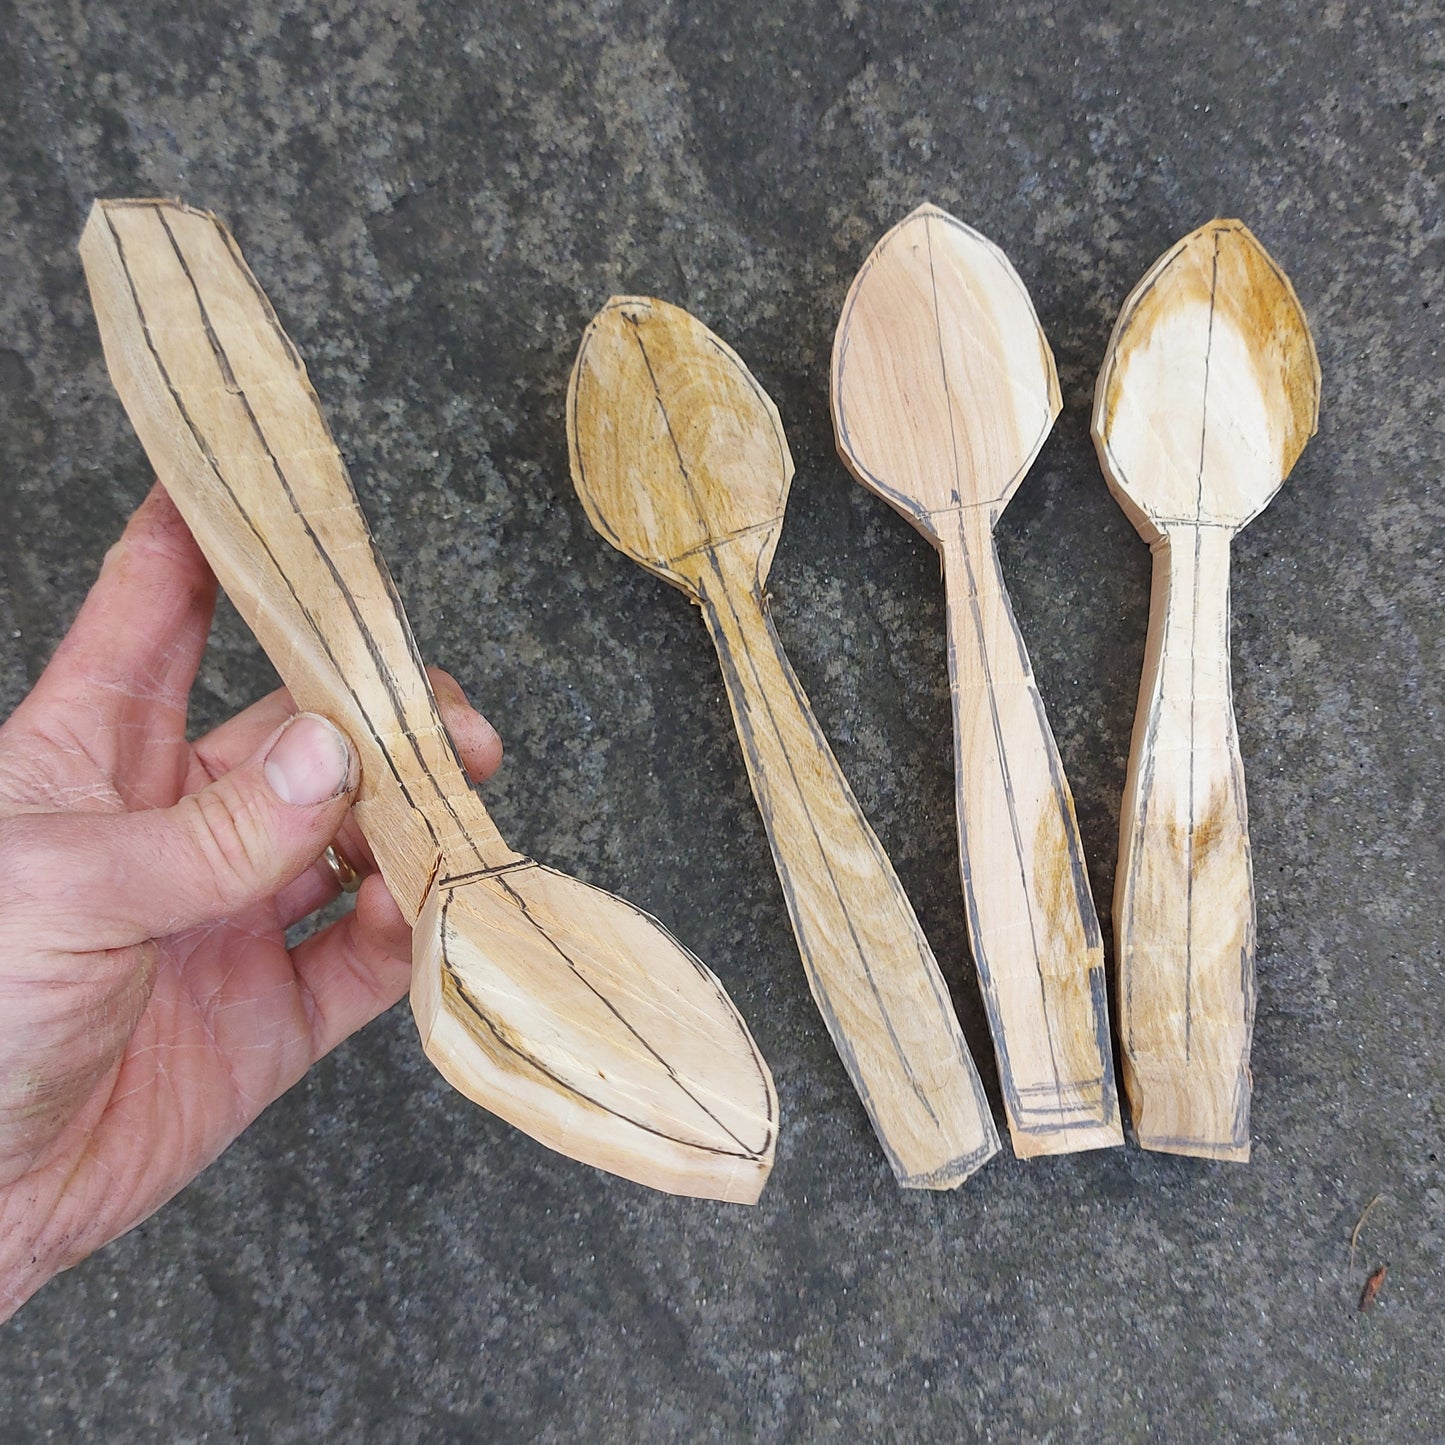 1x Eating Spoon Blank - Carve your Own!